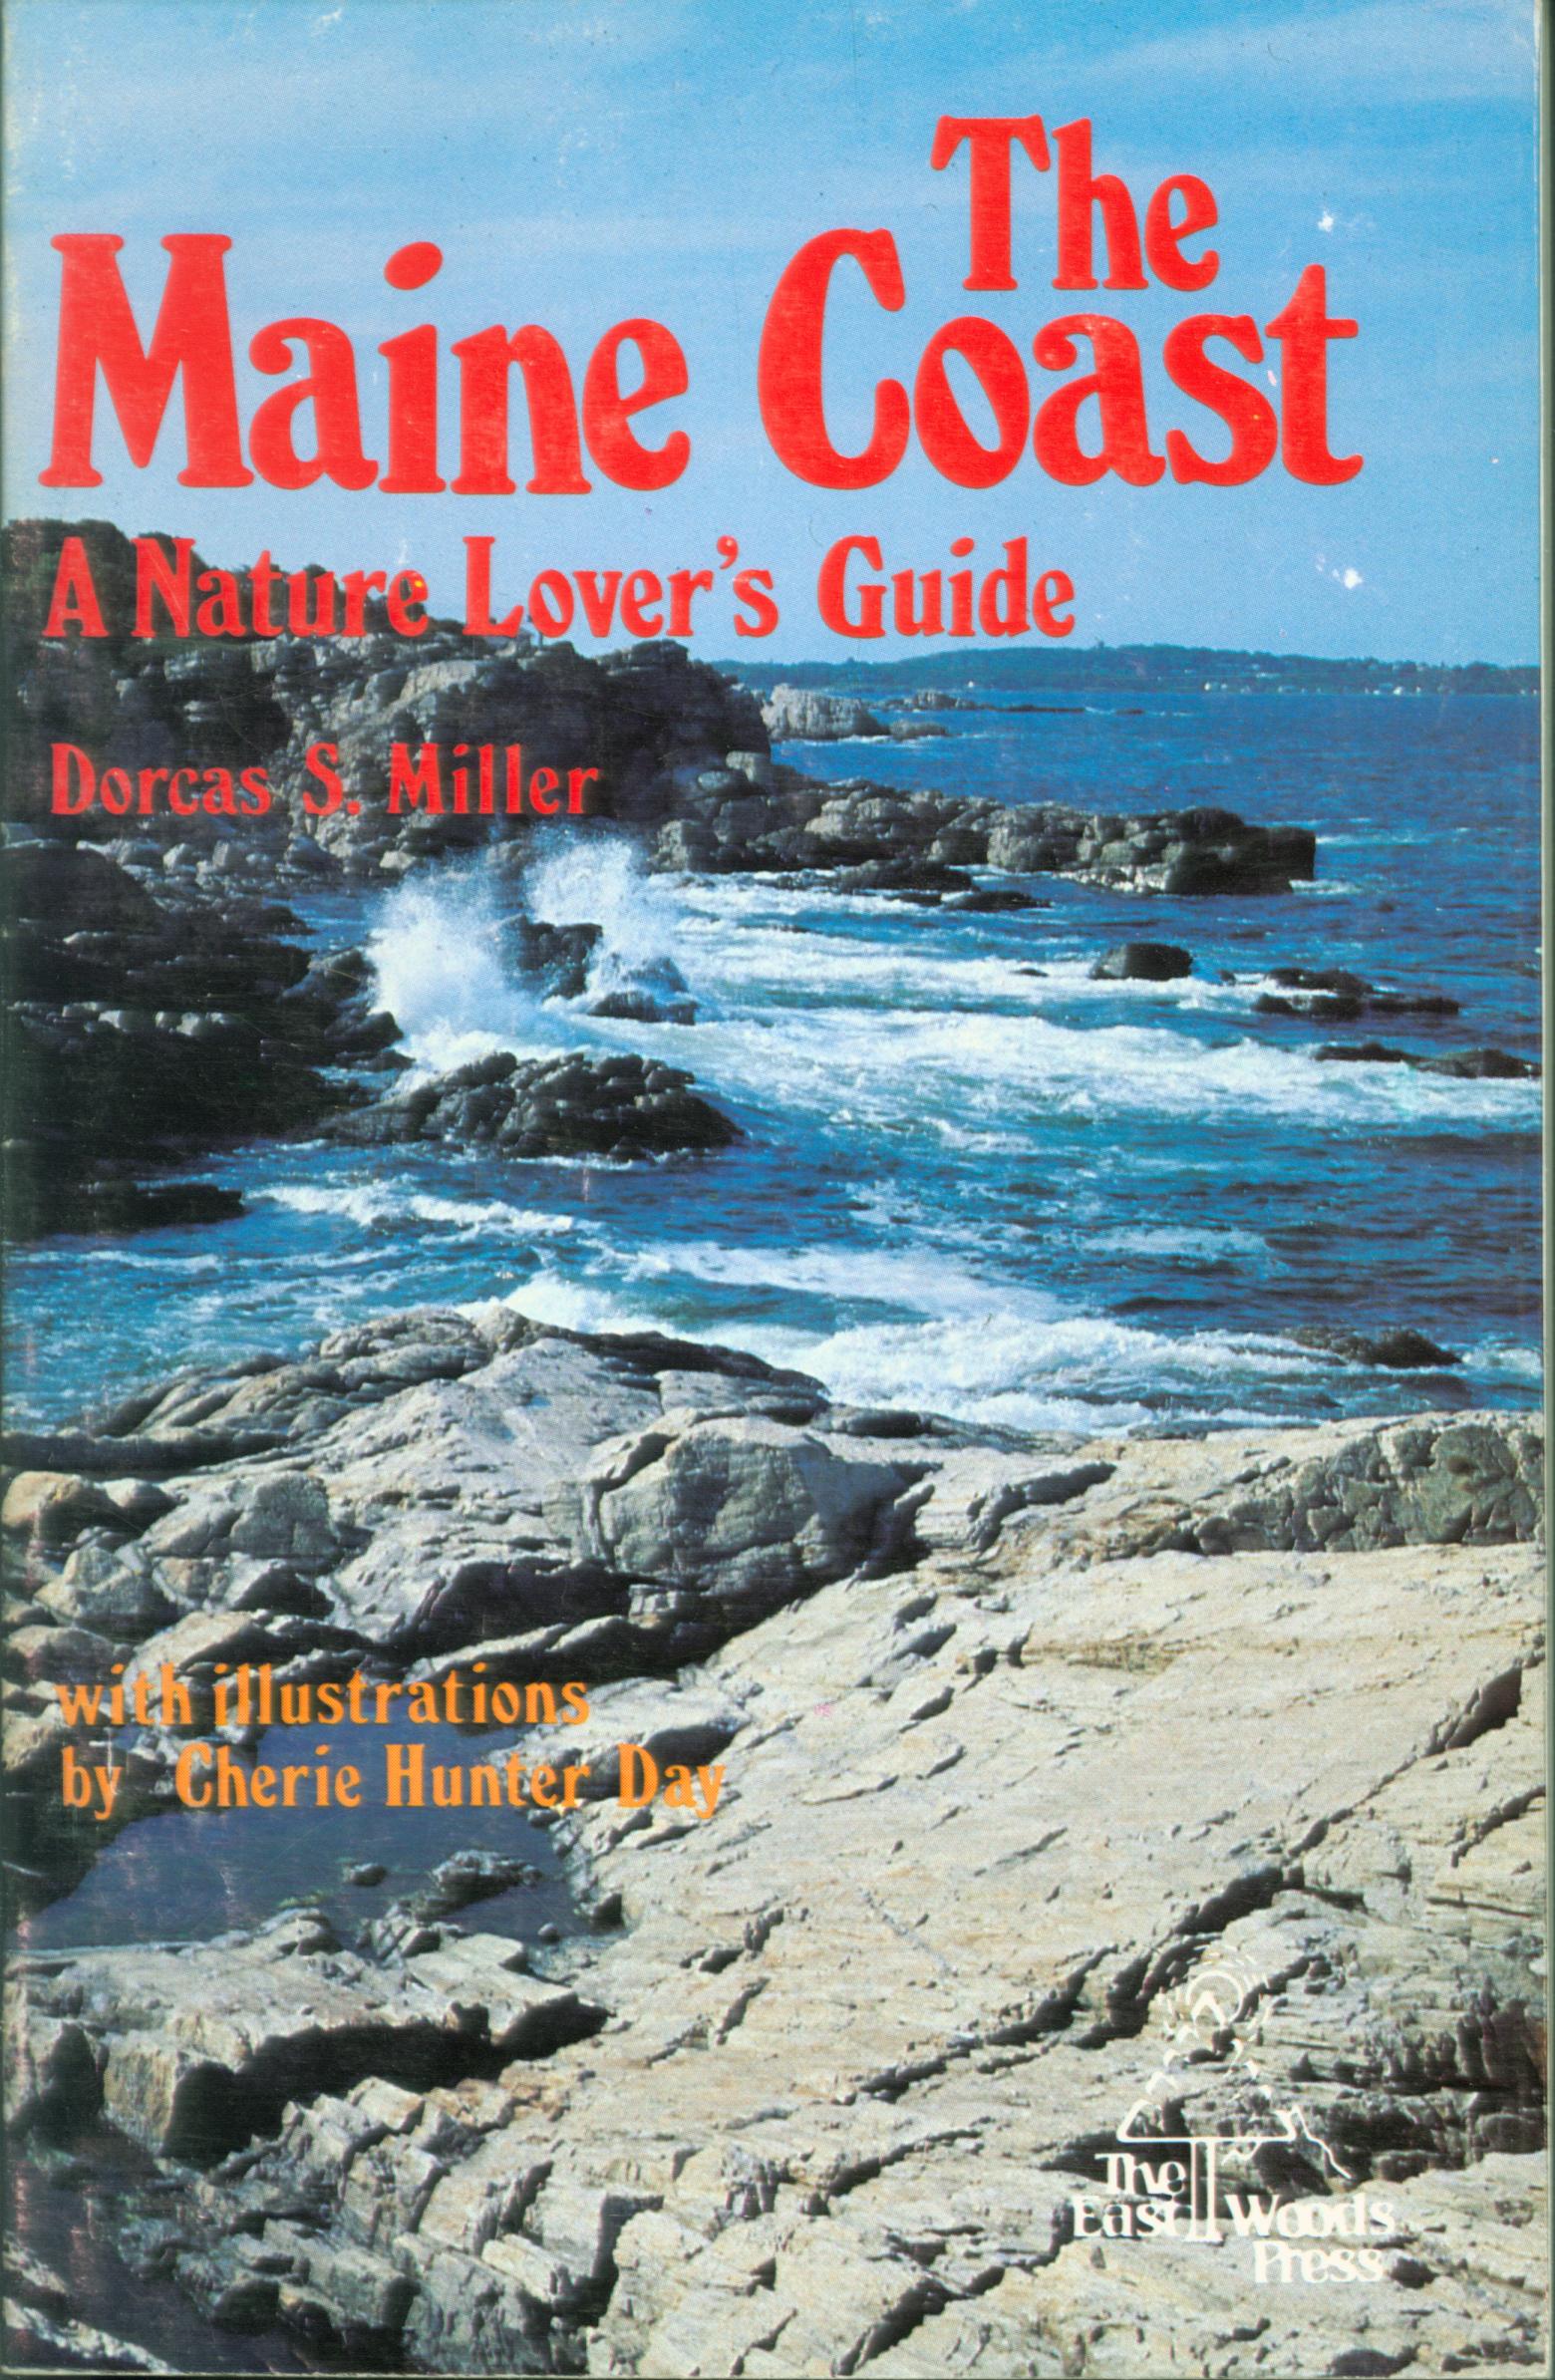 THE MAINE COAST: a nature lover's guide.